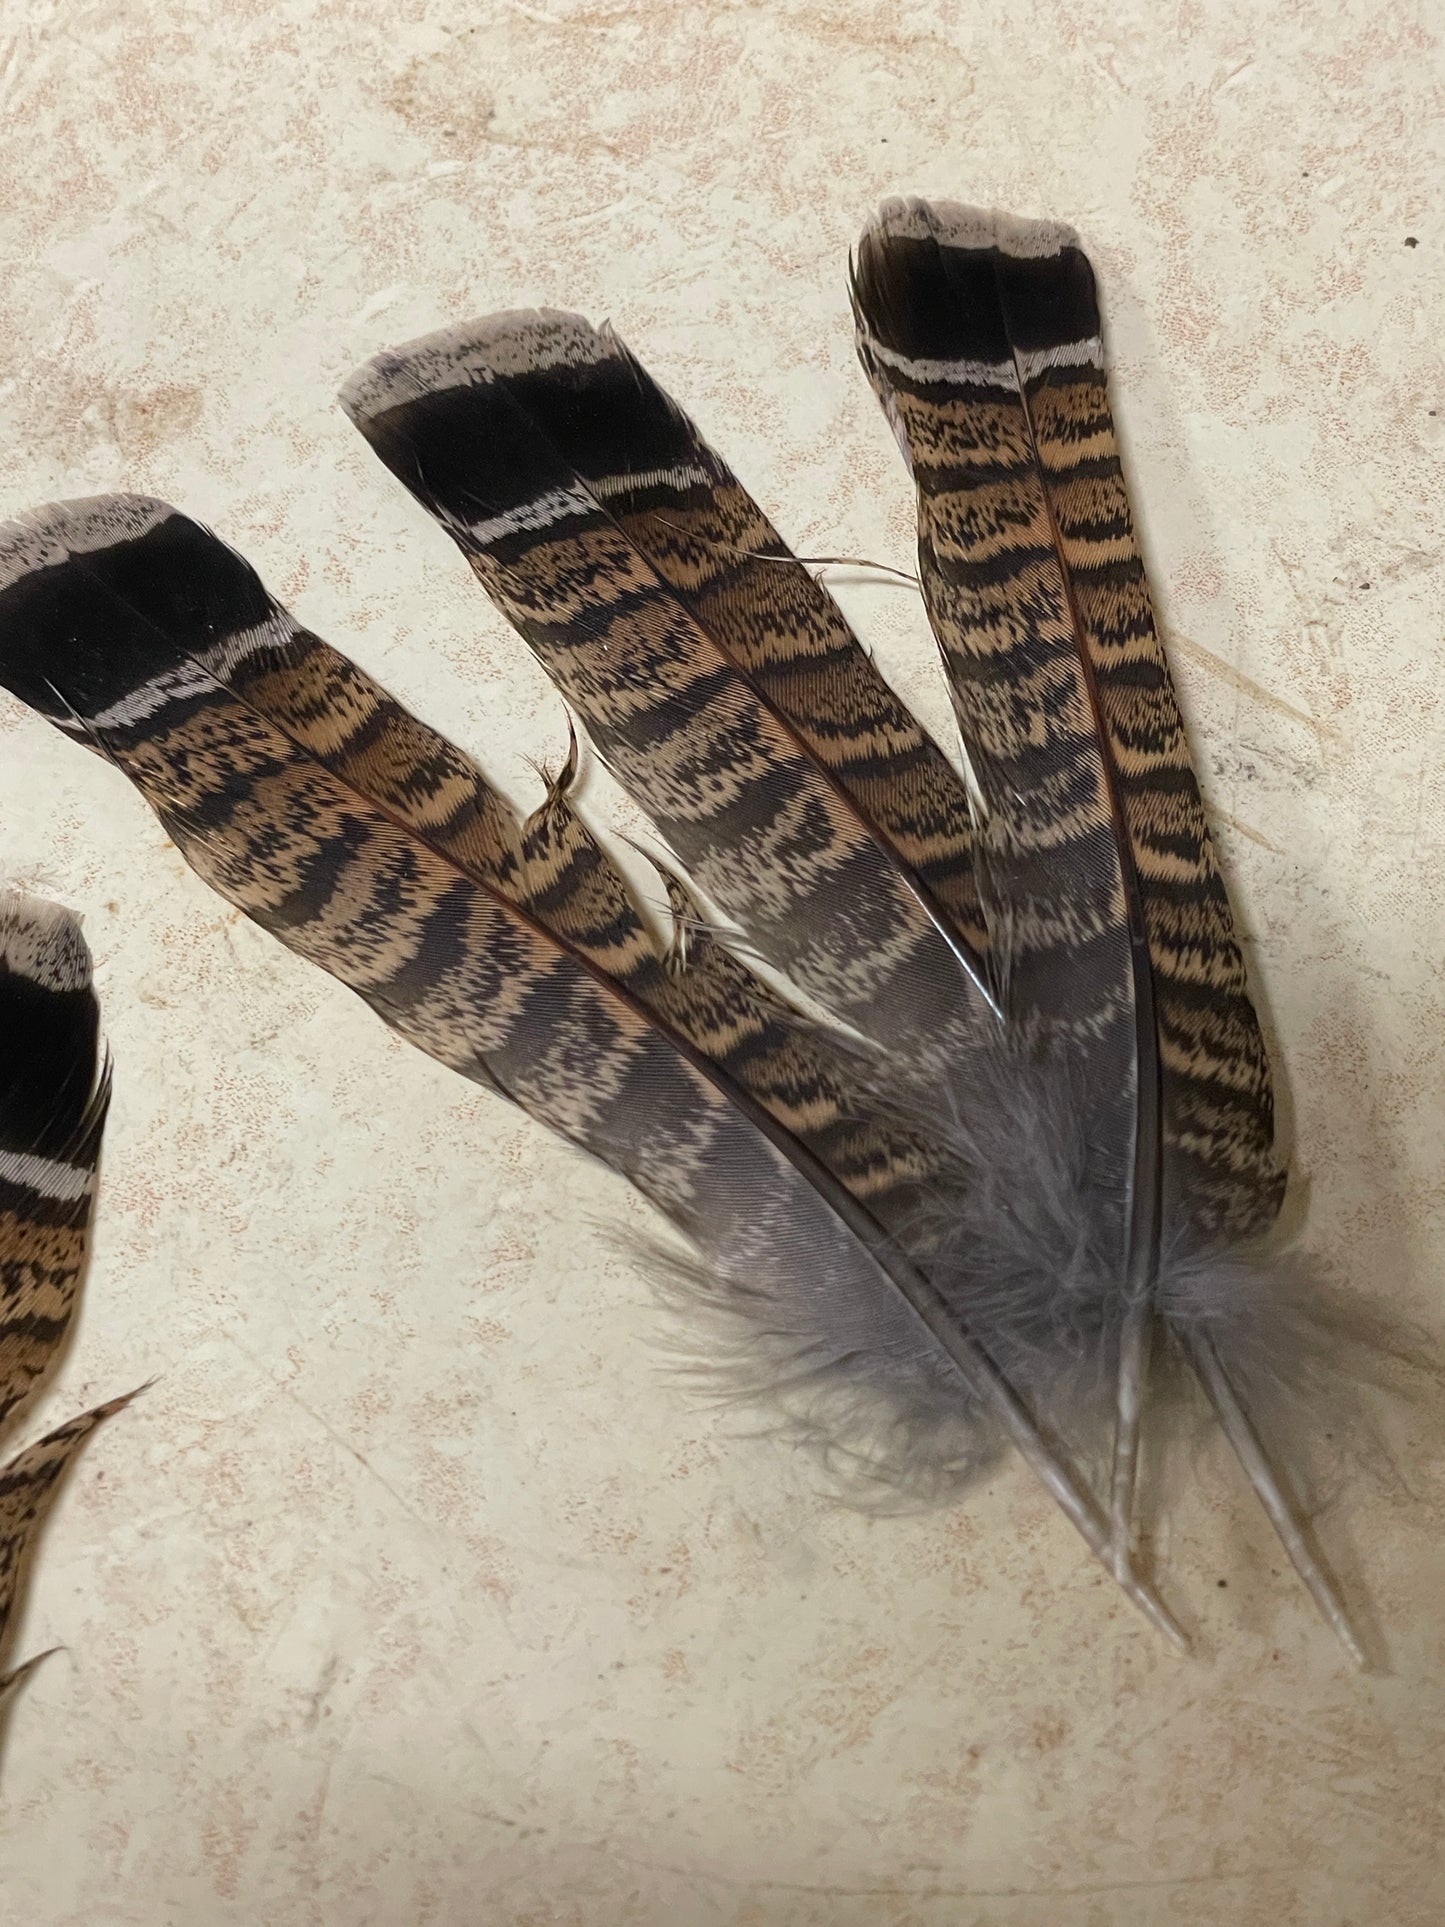 Partridge Tail Feather | Partridge Smudging Feather | Ruffed Grouse Partridge Tail Feathers